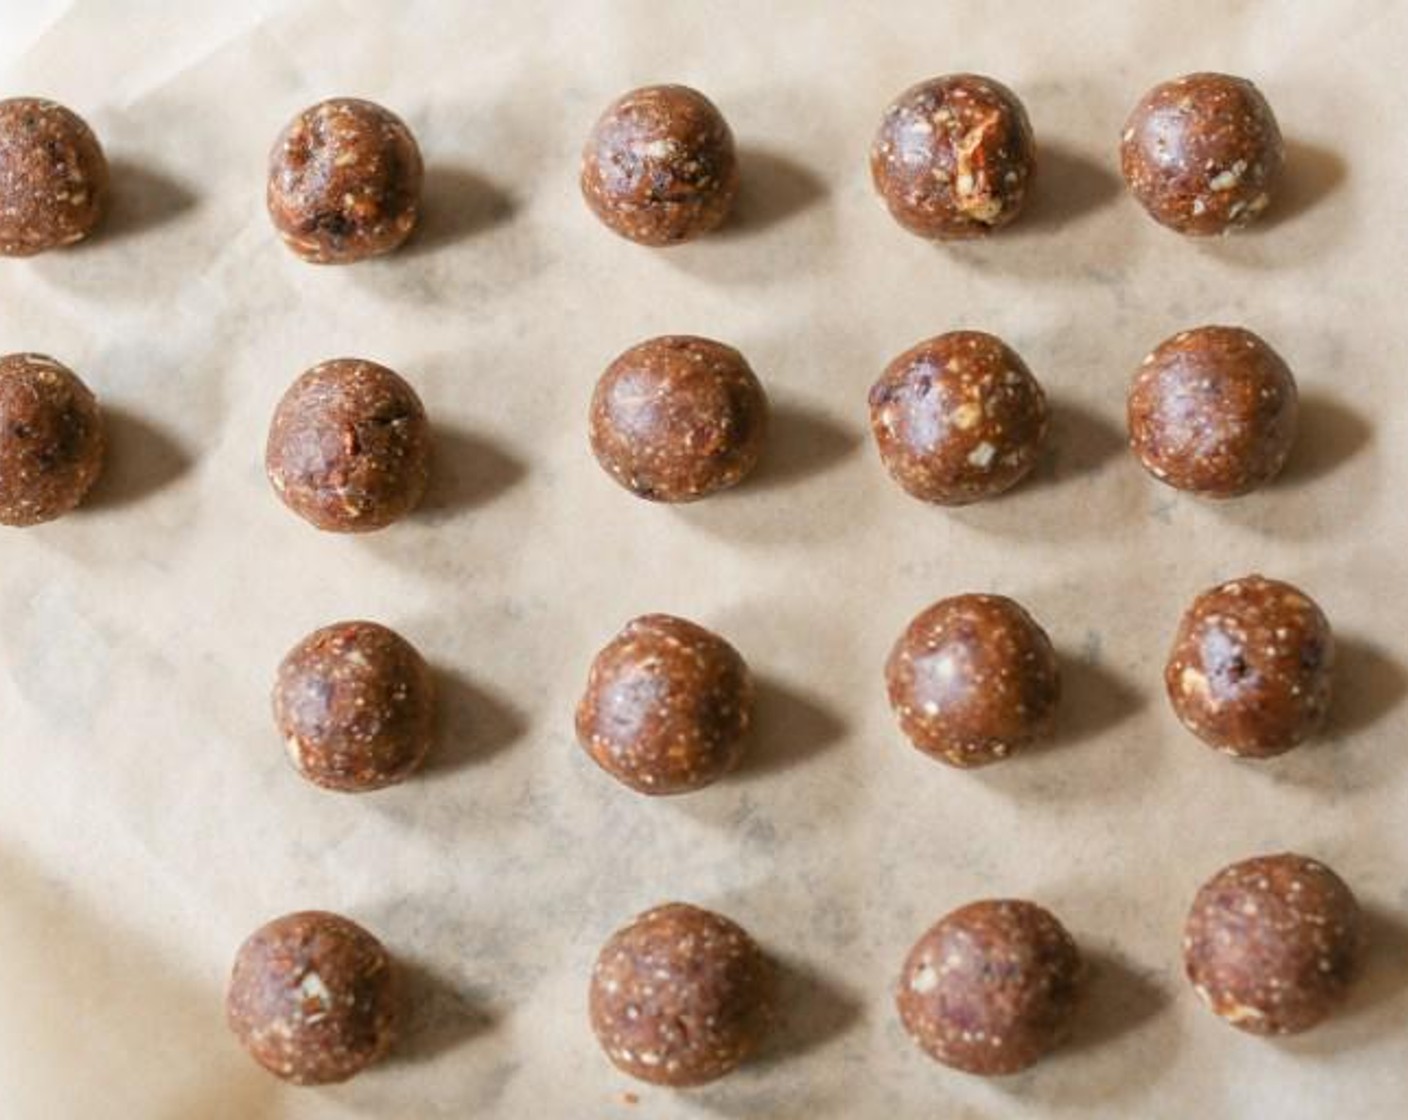 step 3 Line a baking sheet with parchment paper. With damp hand, roll heaping tablespoons of the truffle mixture into balls and place them on the prepared baking sheet.